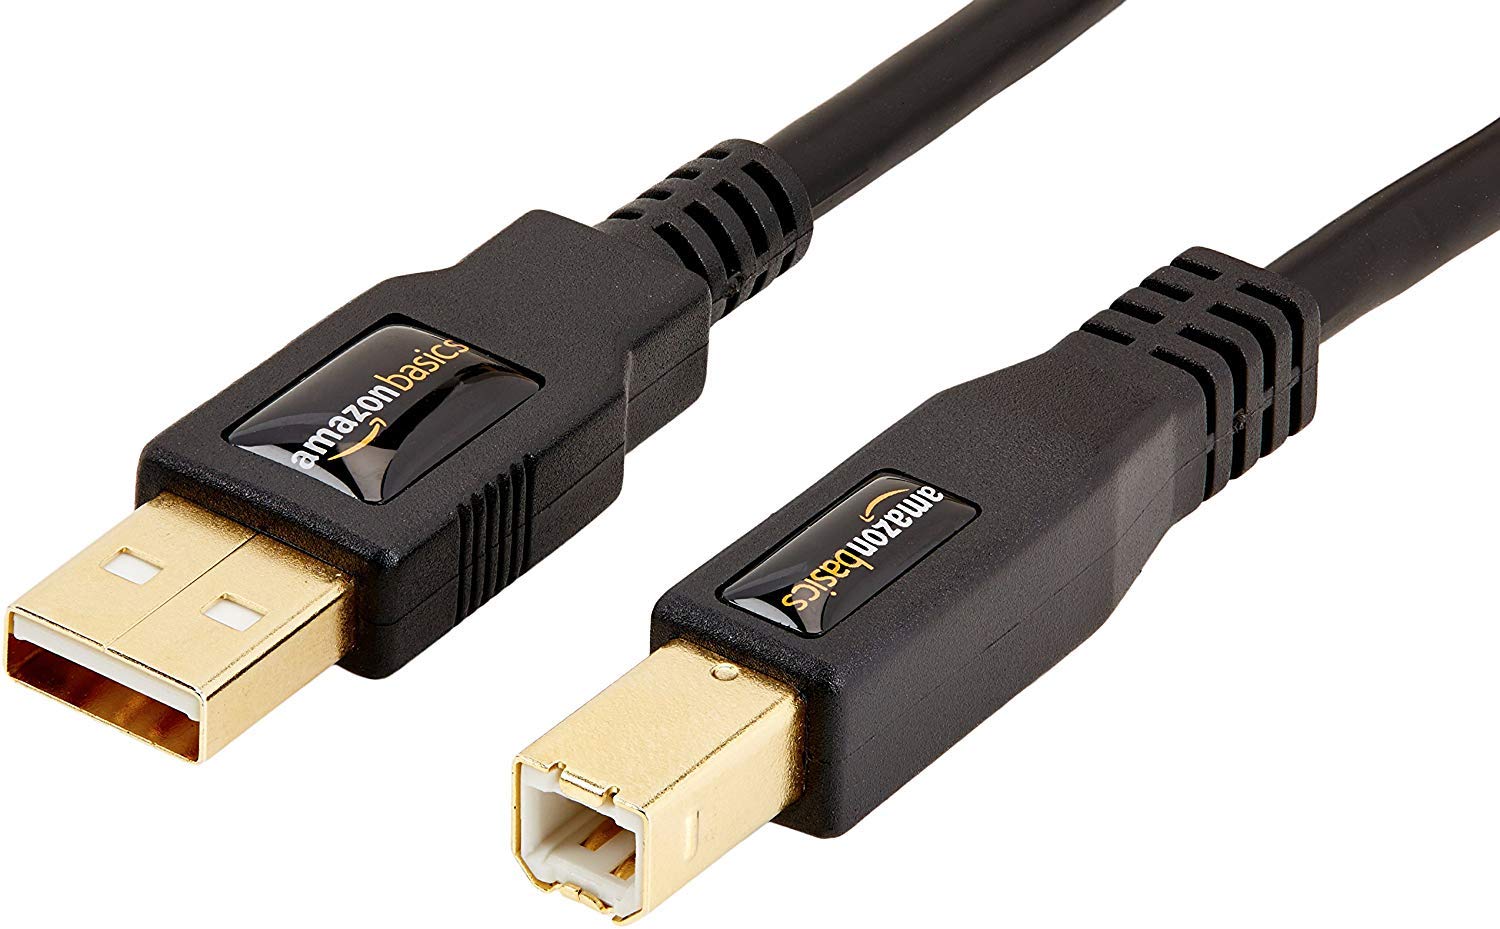 Amazon Basics 24-Pack USB-A to USB-B 2.0 Cable for Printer or External Hard Drive, Gold-Plated Connectors, 6 Foot, Black